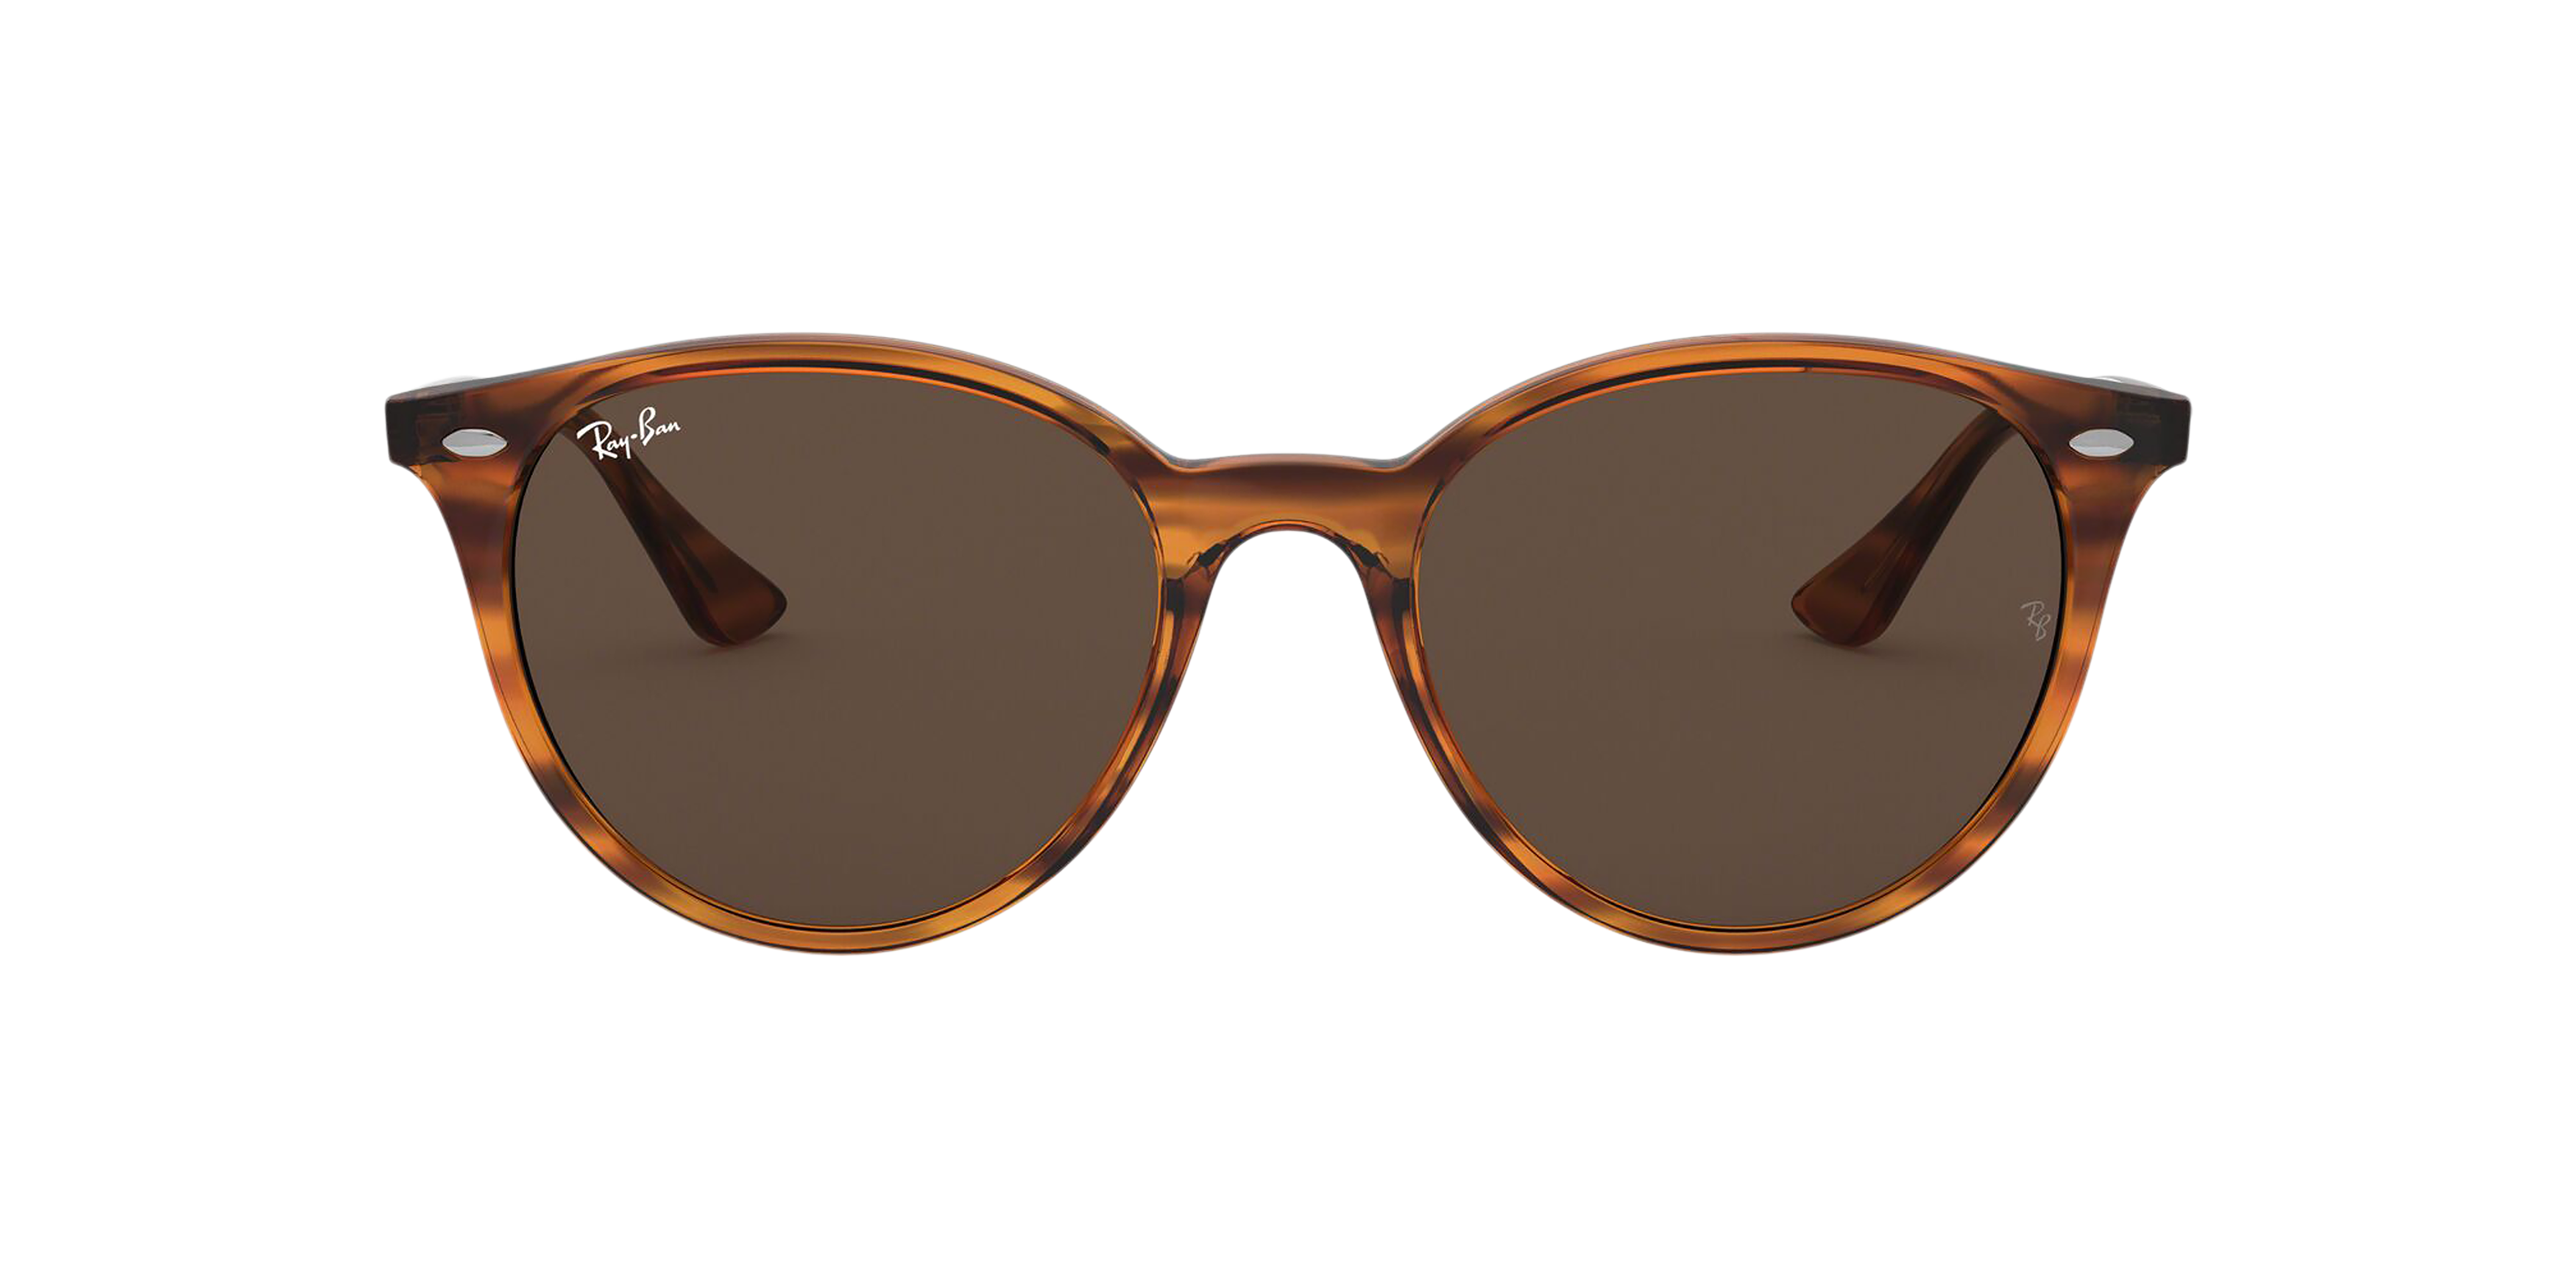 [products.image.front] RAY-BAN RB4305 820/73